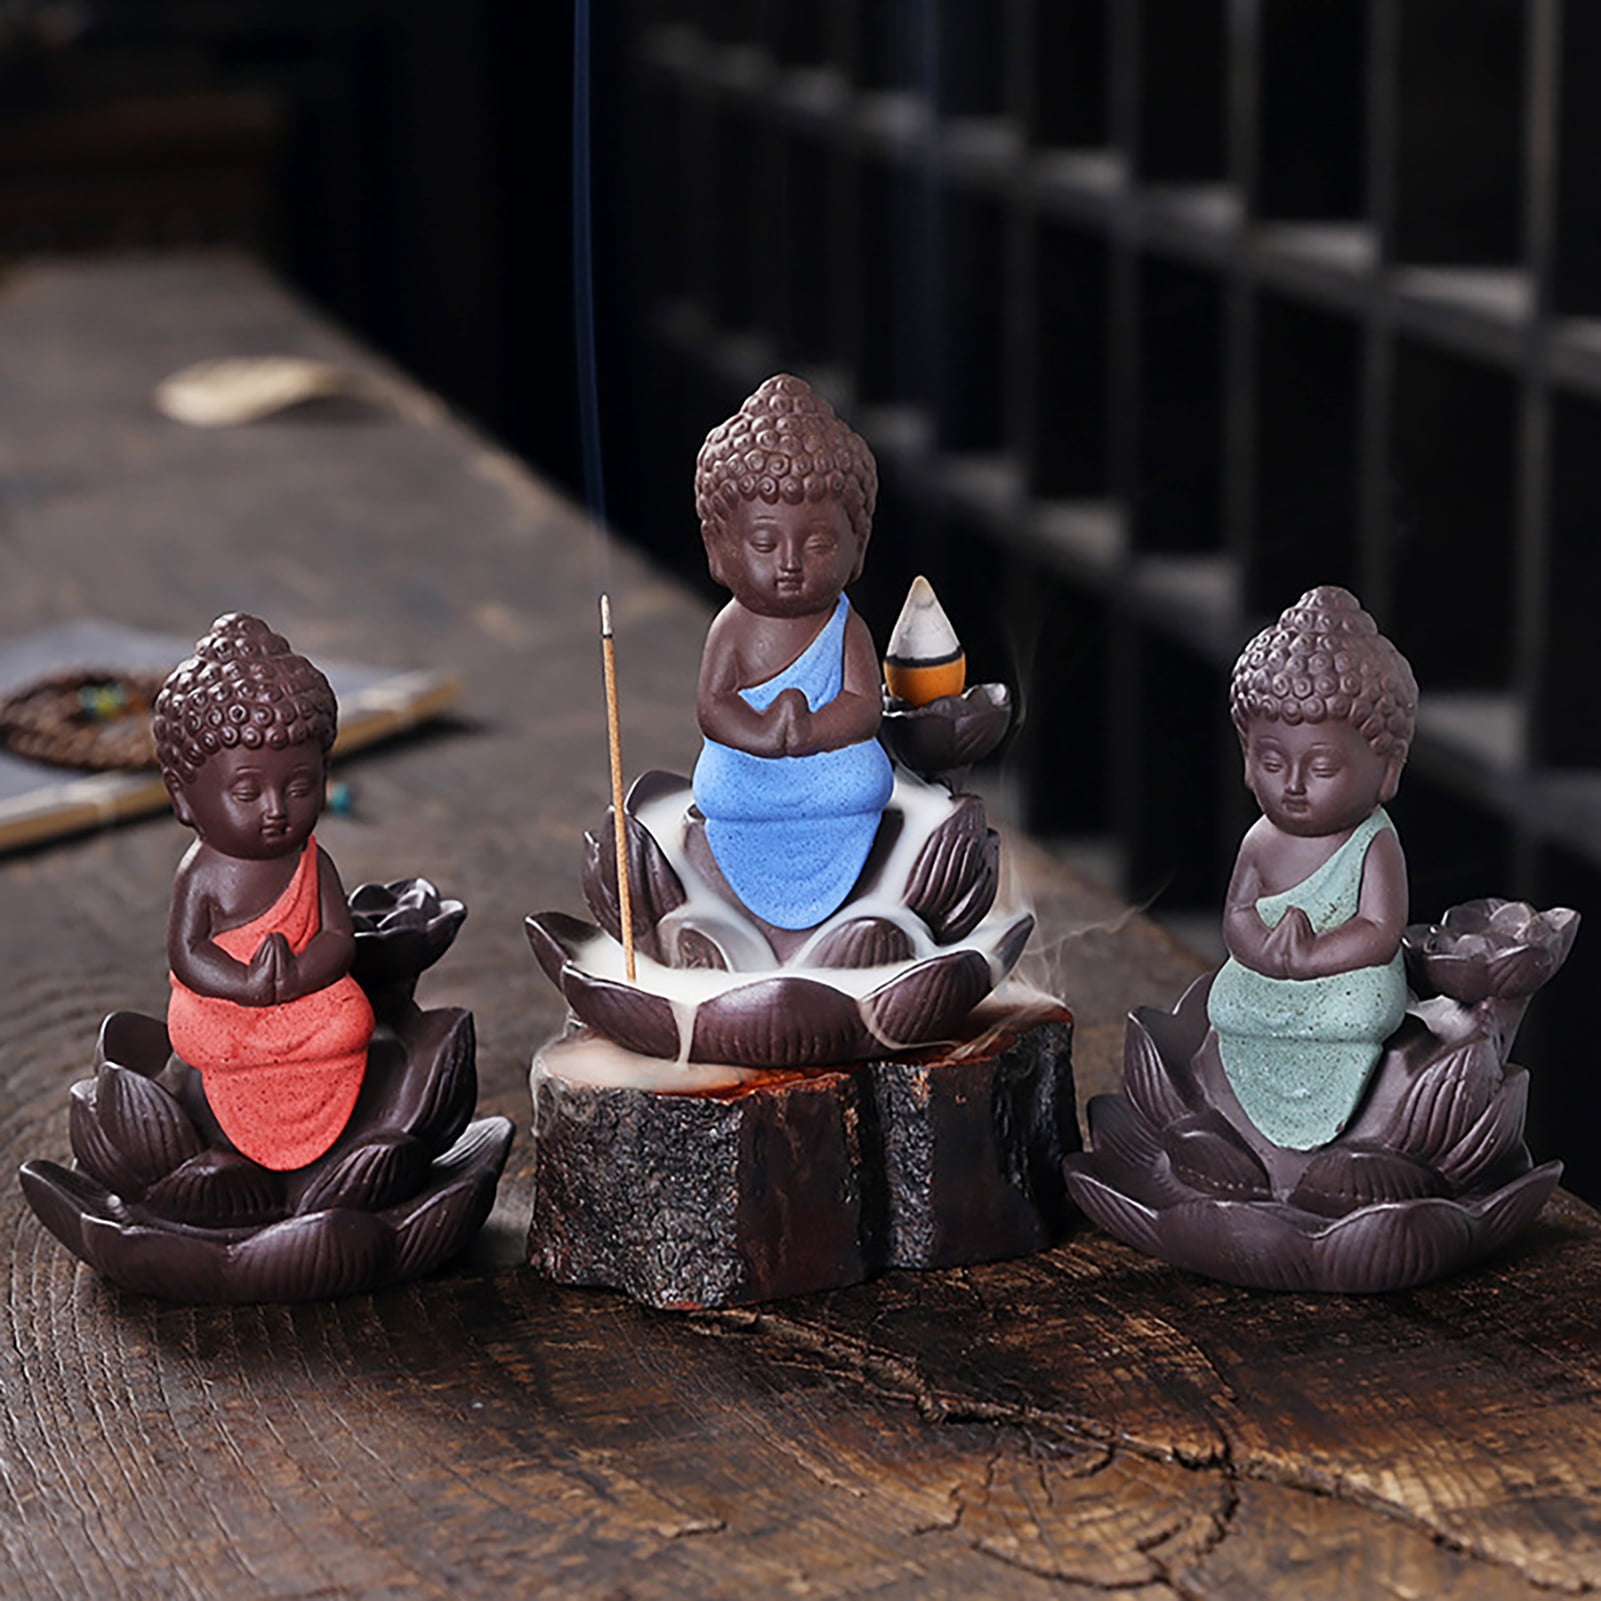 Meditating Monk Buddha with 10 Free Smoke Backflow Scented Cone Incenses 